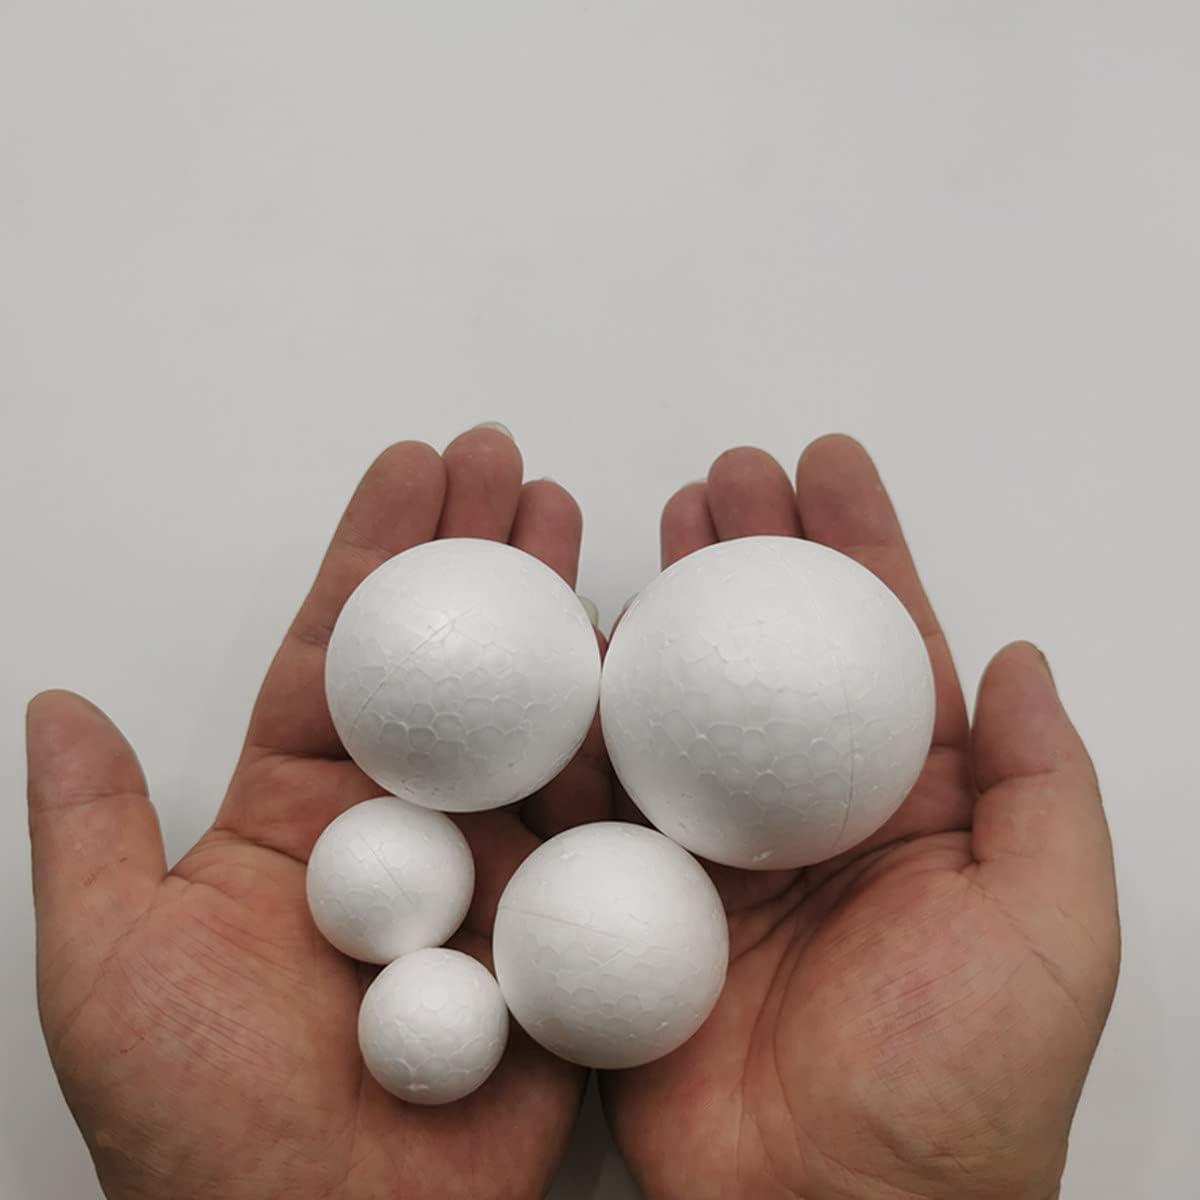 130 Pack Craft Foam Balls, 7 Sizes Including 1-4 Inches, White Polystyrene  Smooth Round Balls